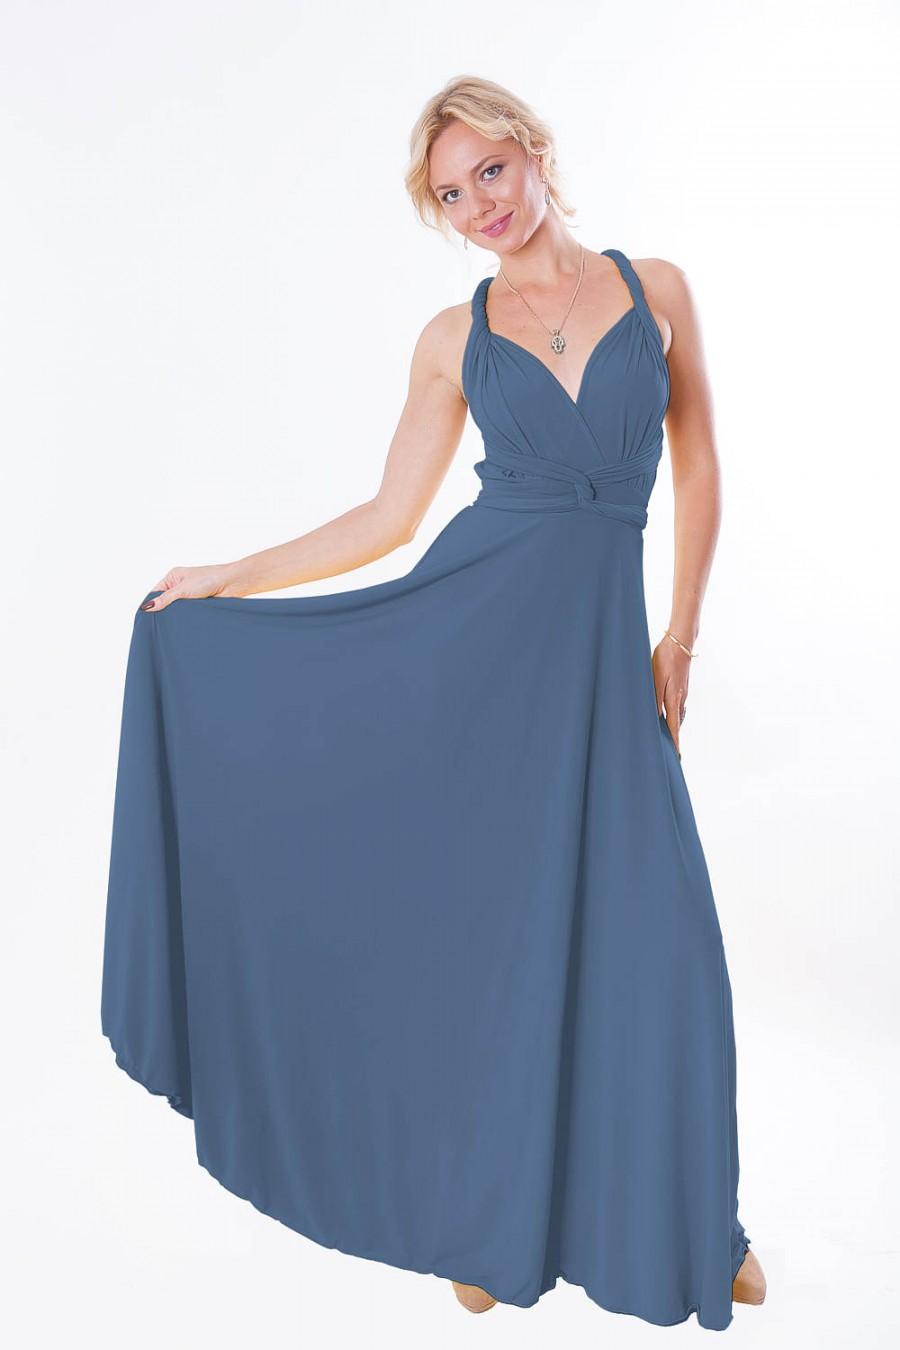 Mariage - Convertible/Infinity Dress - floor length with long straps  in jeans color wrap dress